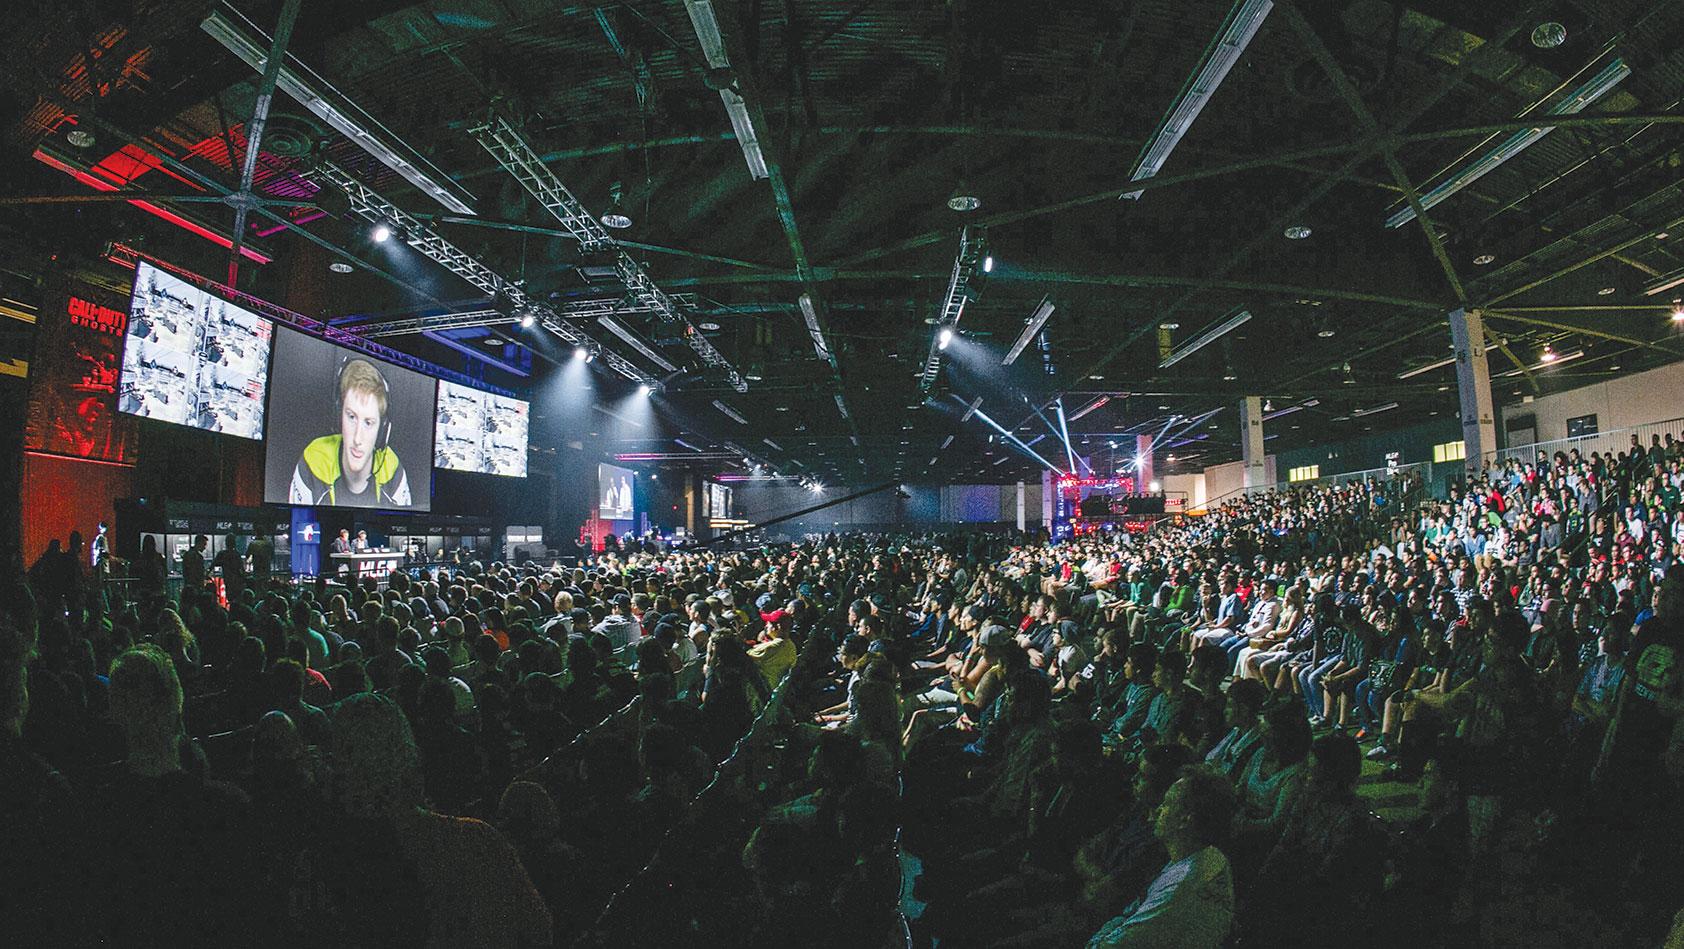 Esports break onto scene as new form of competition